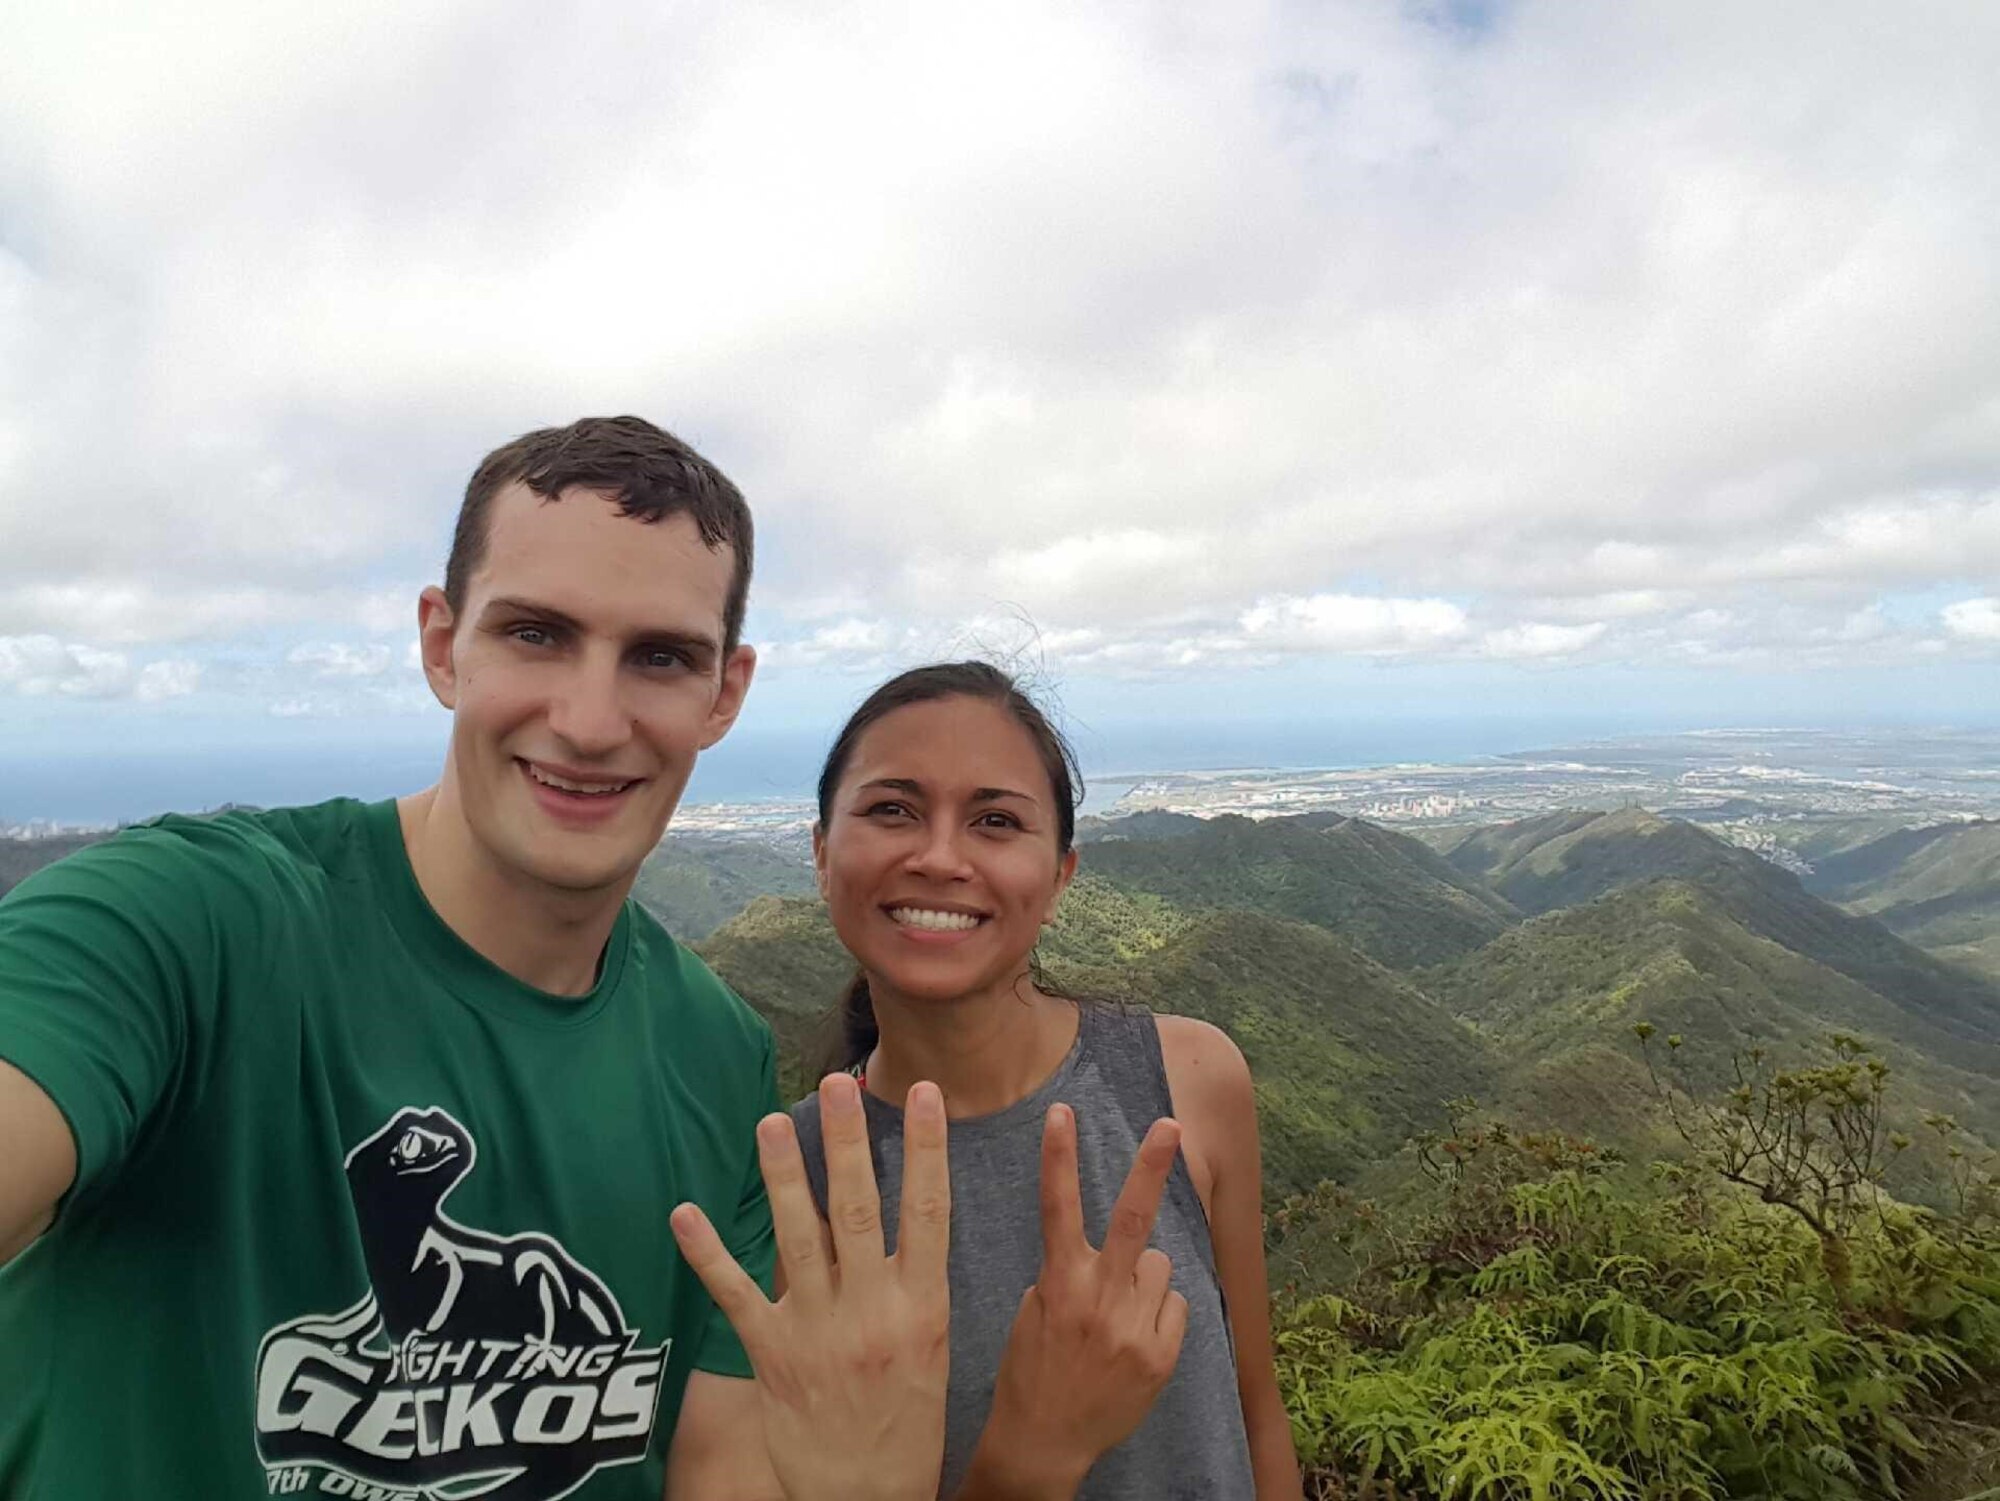 Capt. Sean Zoufaly, 17th Operational Weather Squadron Operations flight commander, and Krystal Reiter complete a 4.2-mile hike to honor Pat Tillman in Hawaii, April 18, 2020. The 17th OWS hosted Pat’s Run to promote Airman fitness and honor the fallen. (Courtesy photo)